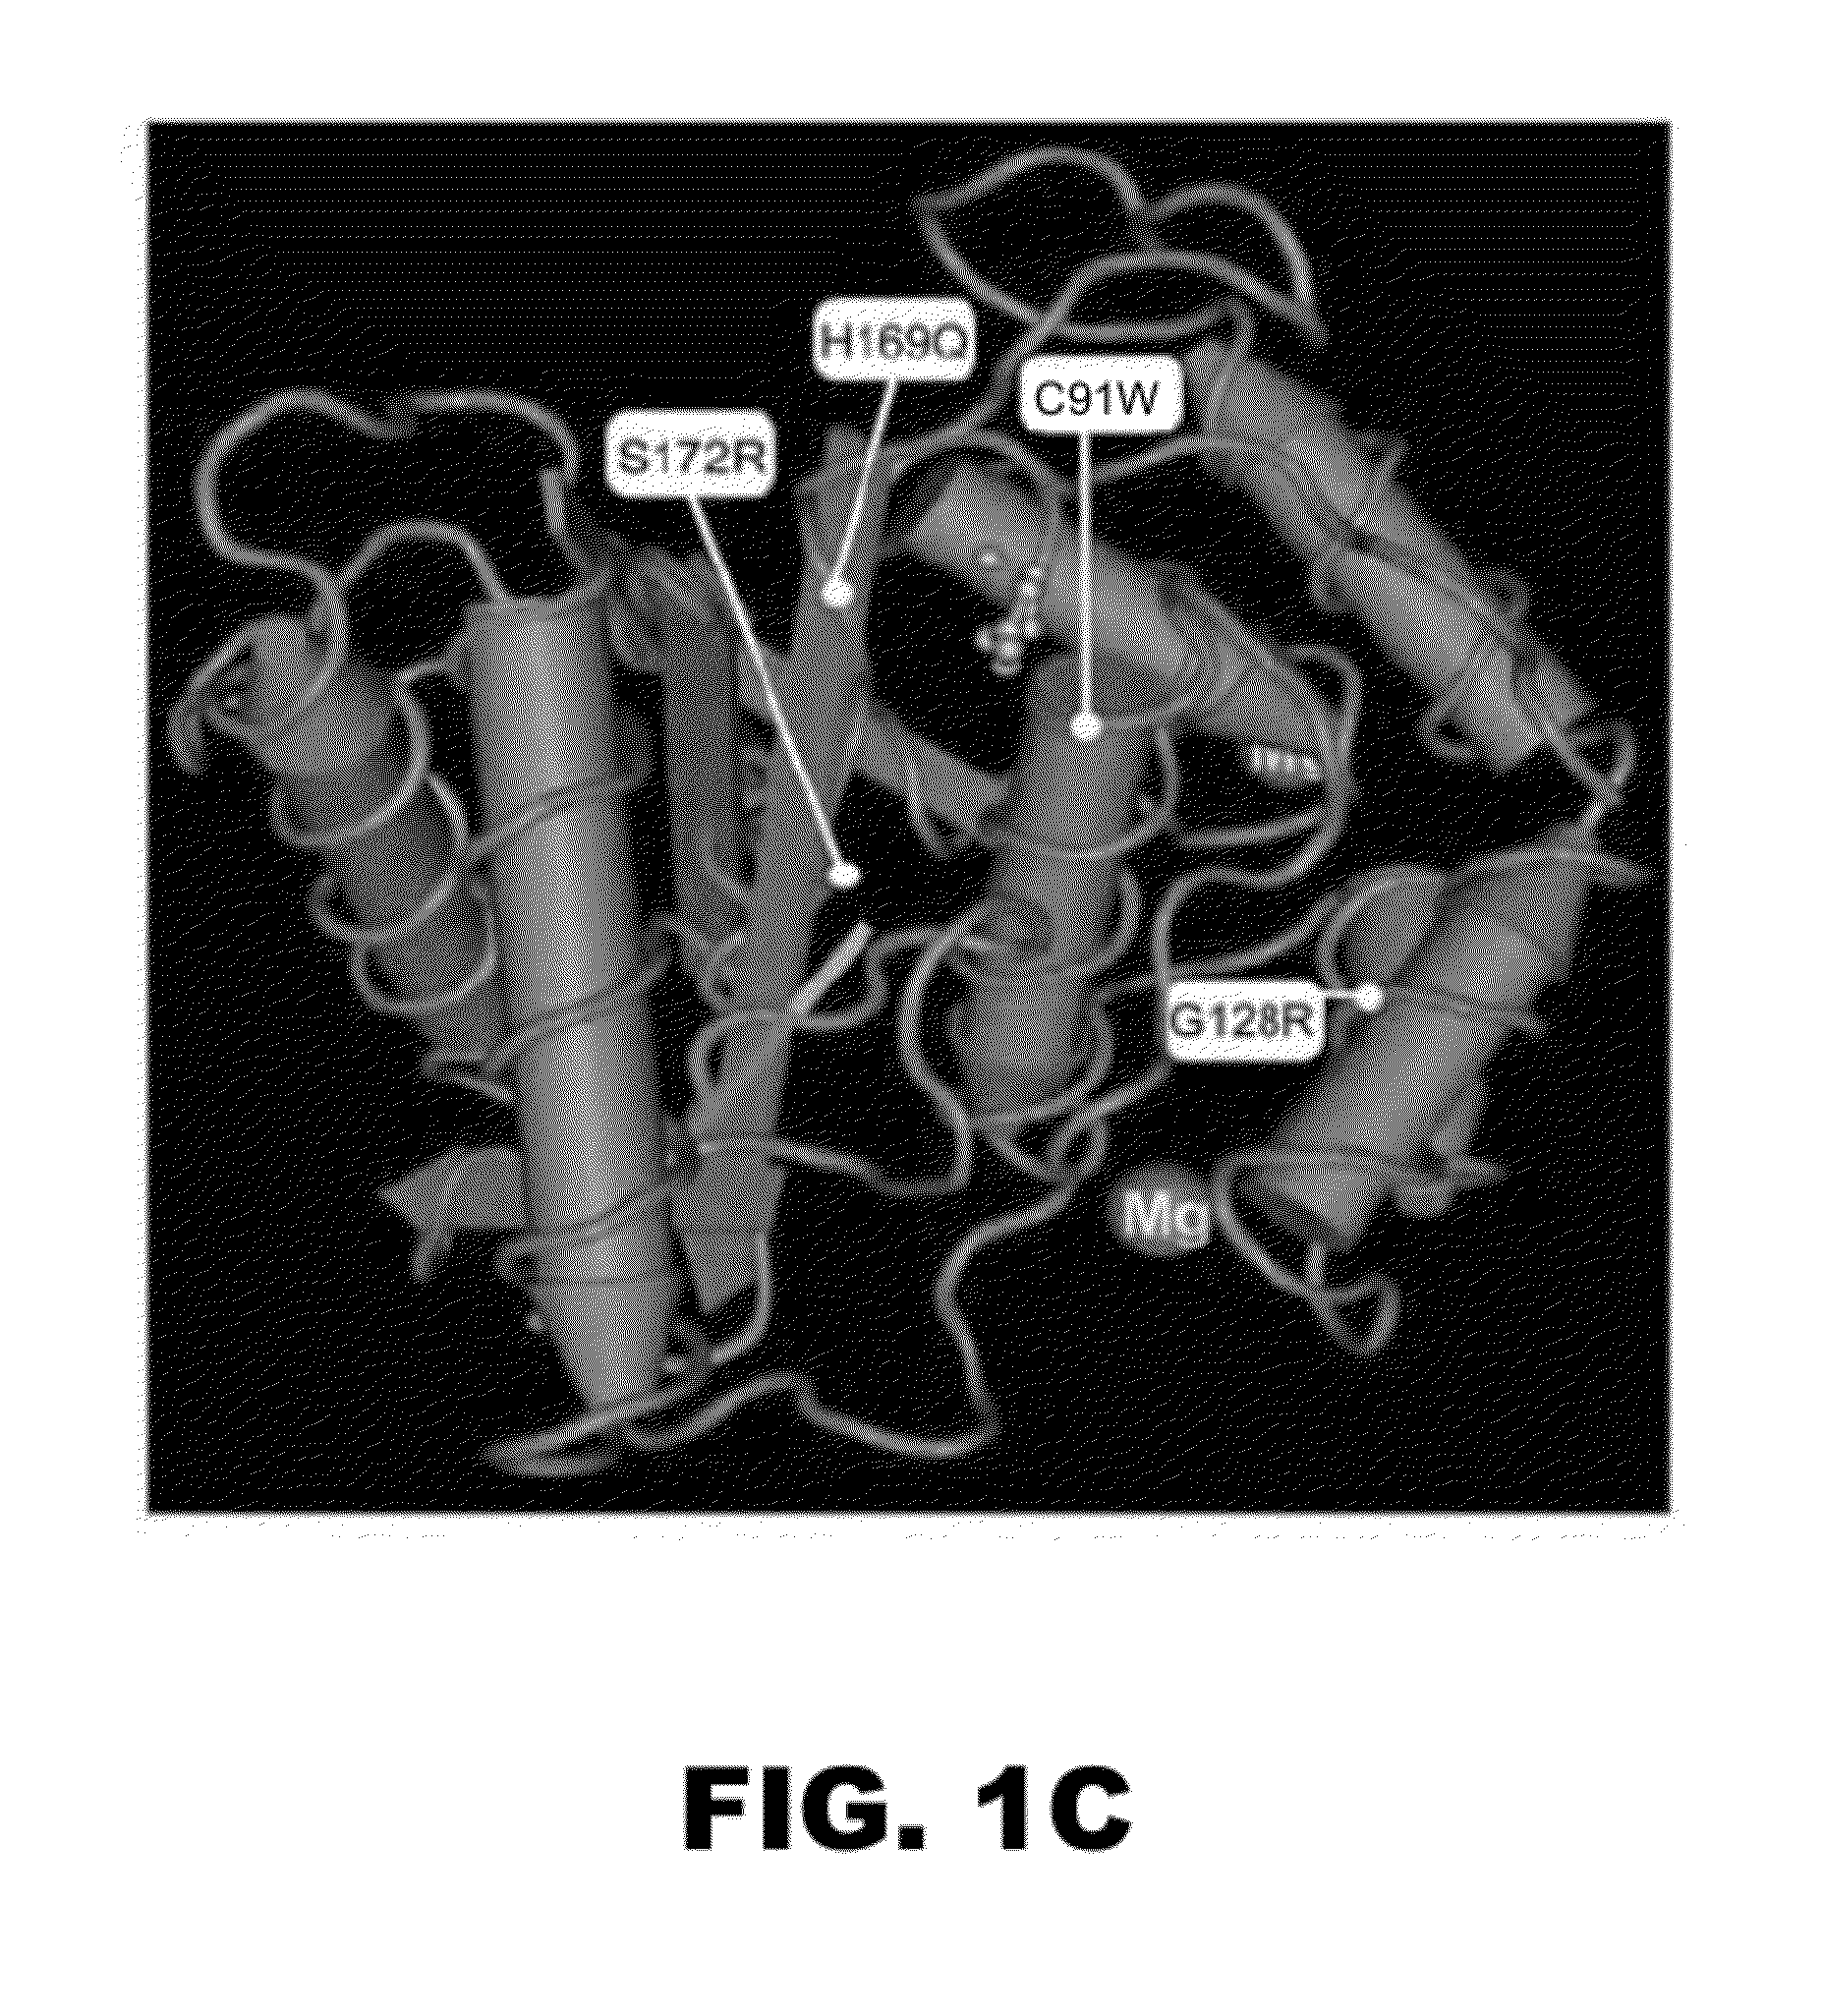 Compositions and methods for detecting cancer metastasis